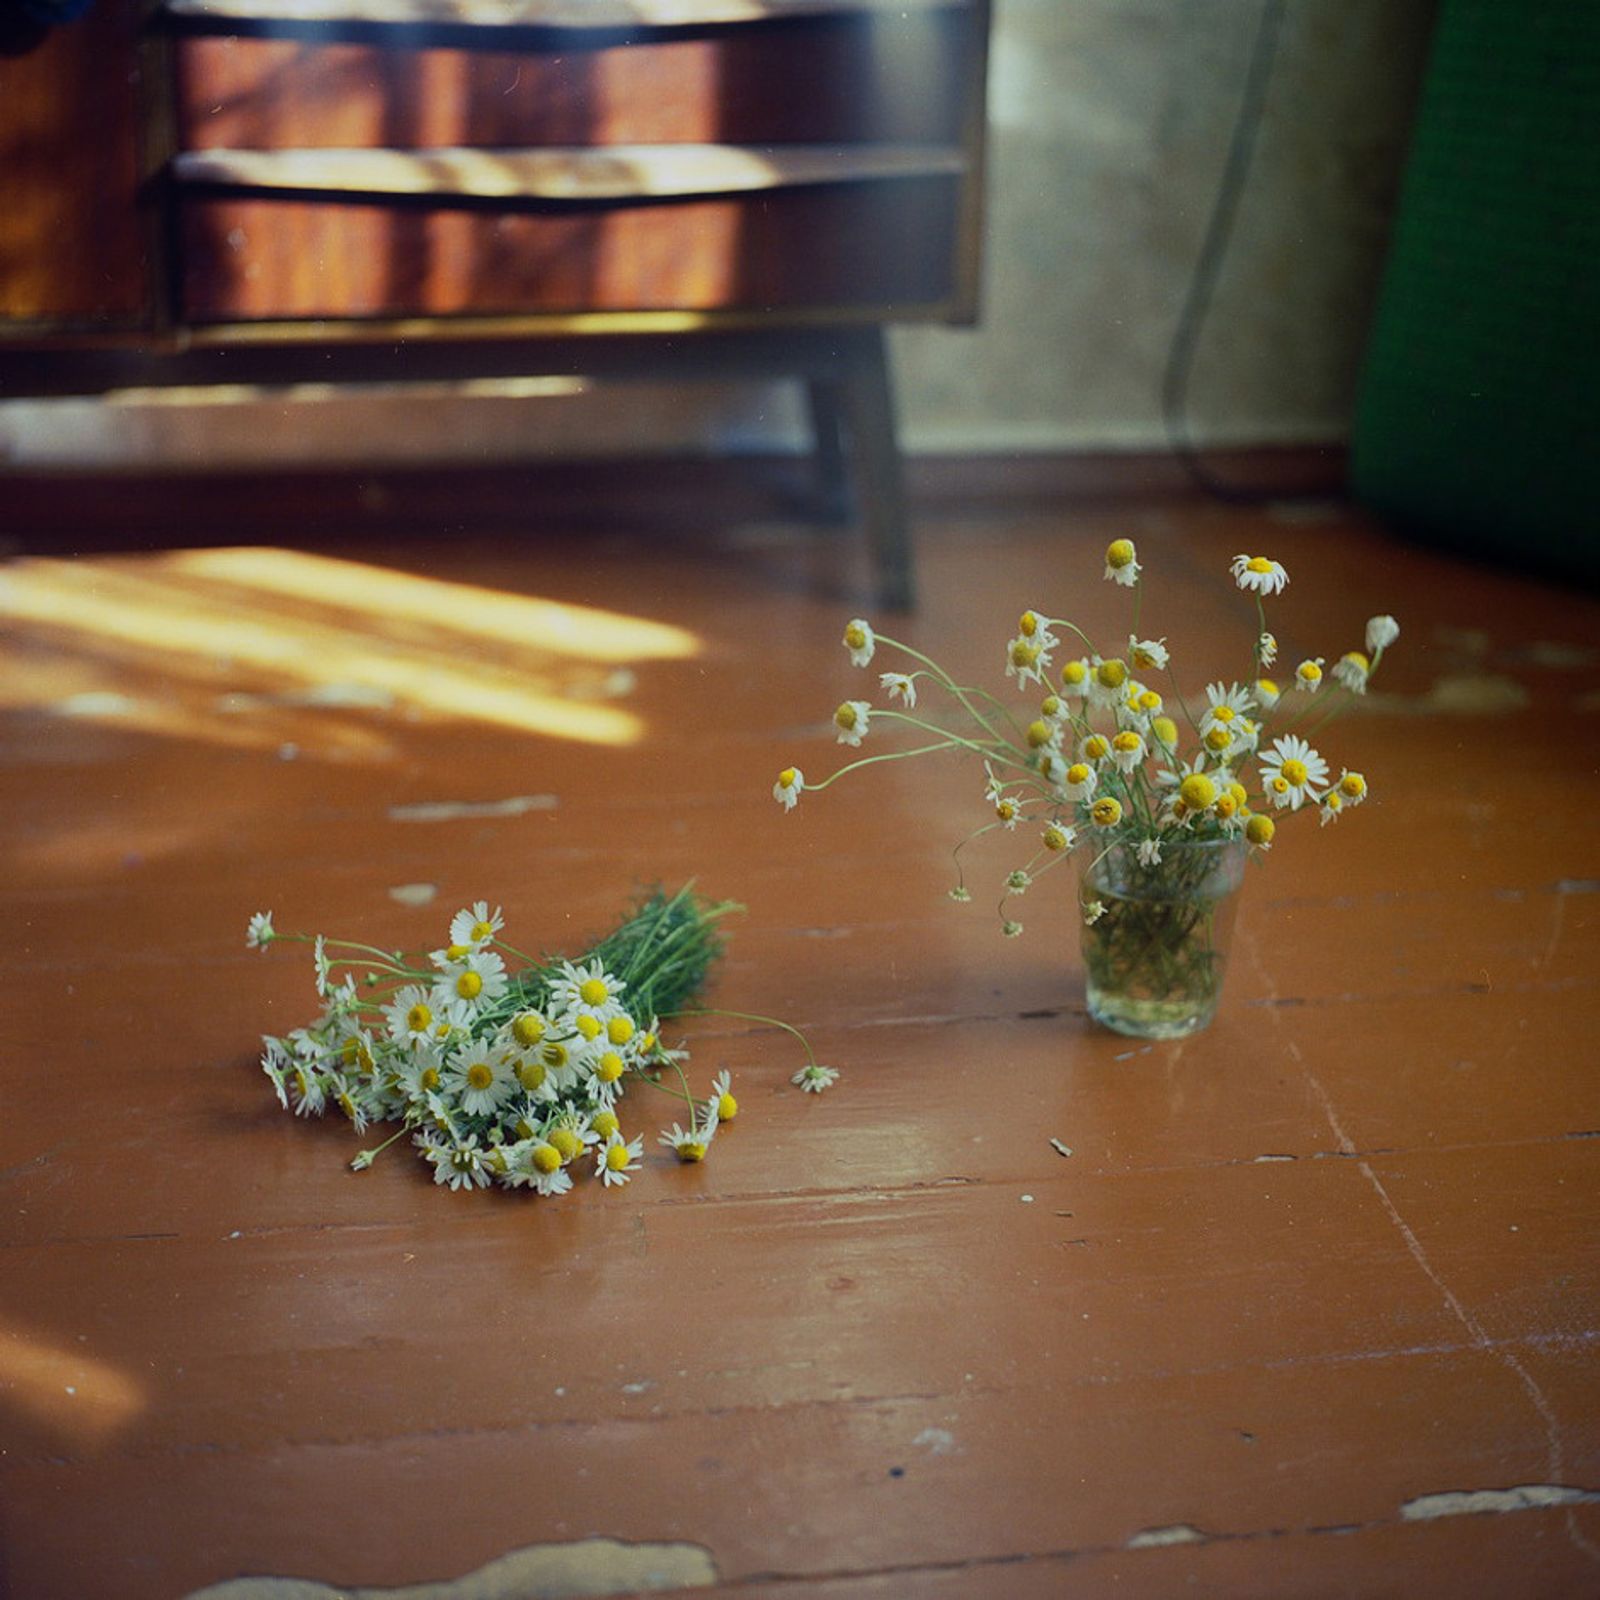 © Kate Dmitrieva - Image from the Broken flowers  photography project